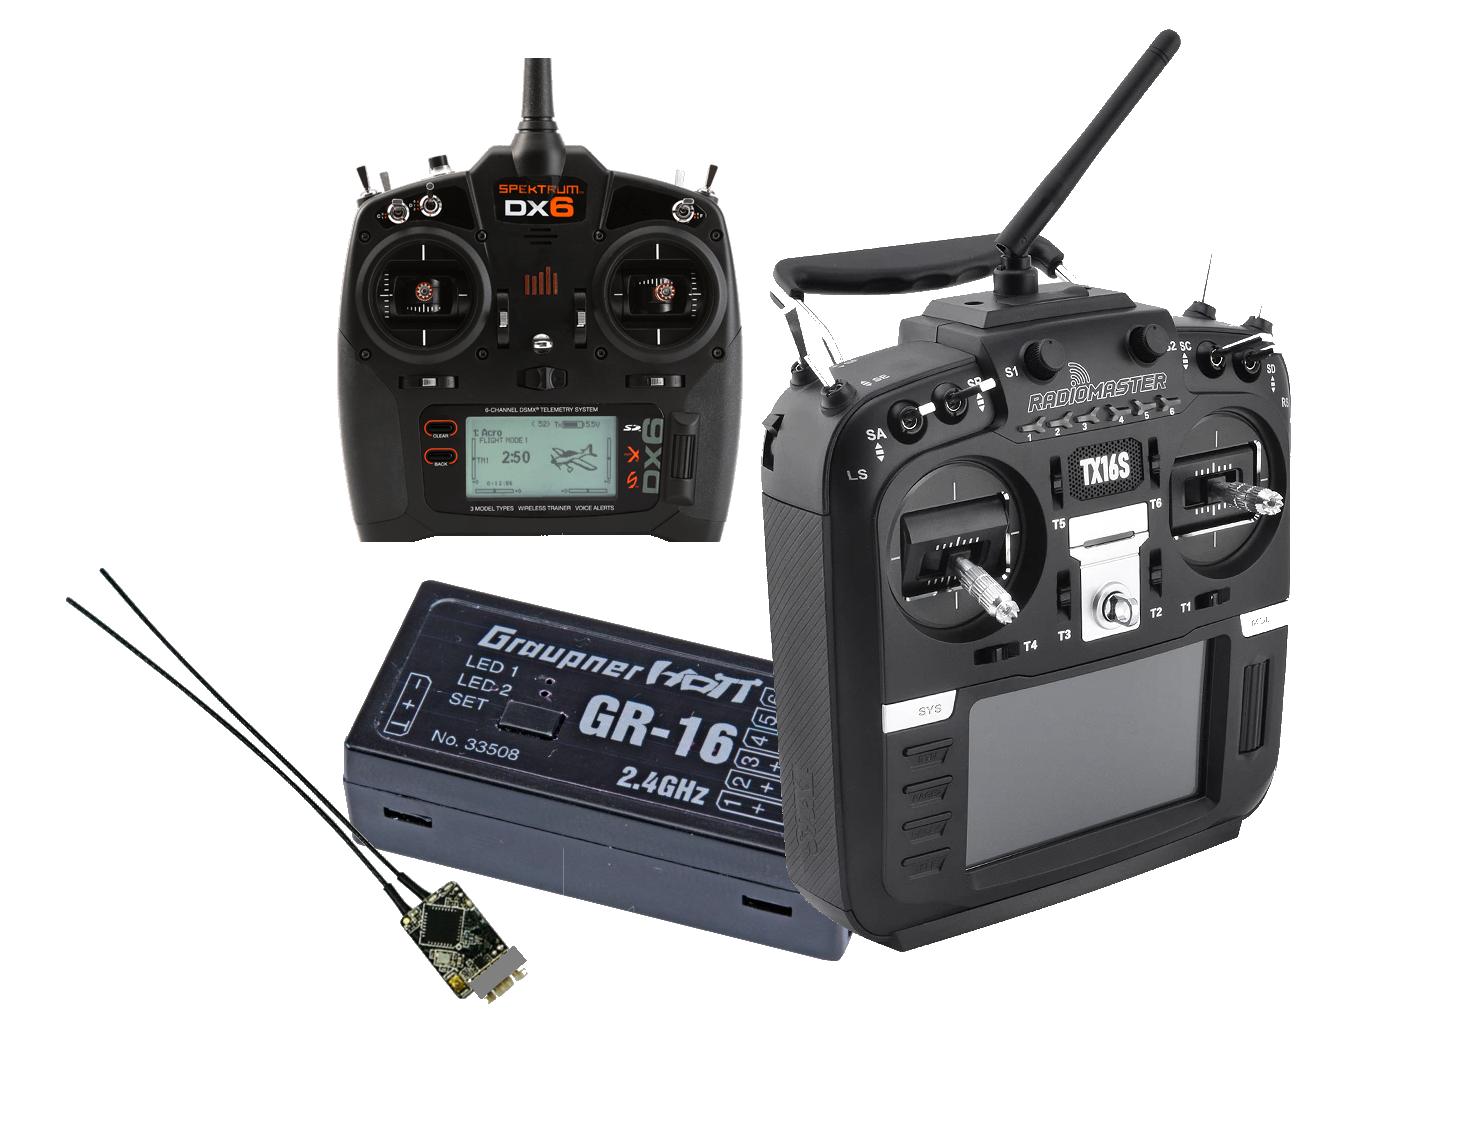 Rc Radios For Airplanes: Overview and Factors to Consider for RC Radios for Airplanes